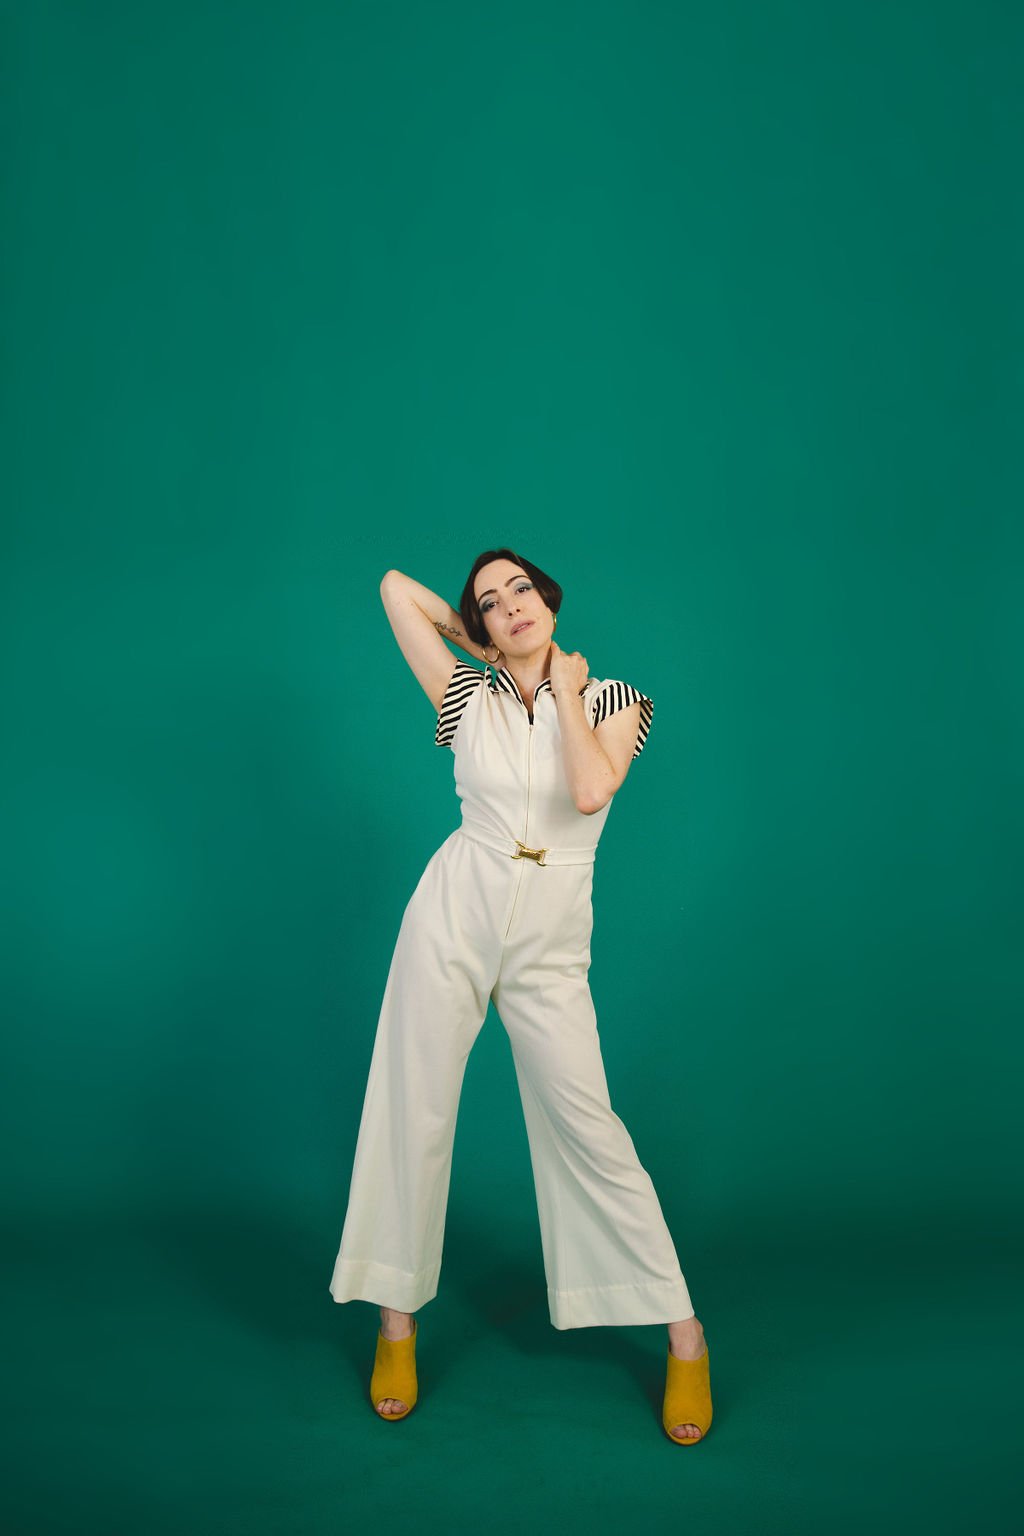  Editorial photo of actor Yvonne Cone in vintage white jumpsuit with a teal background. 